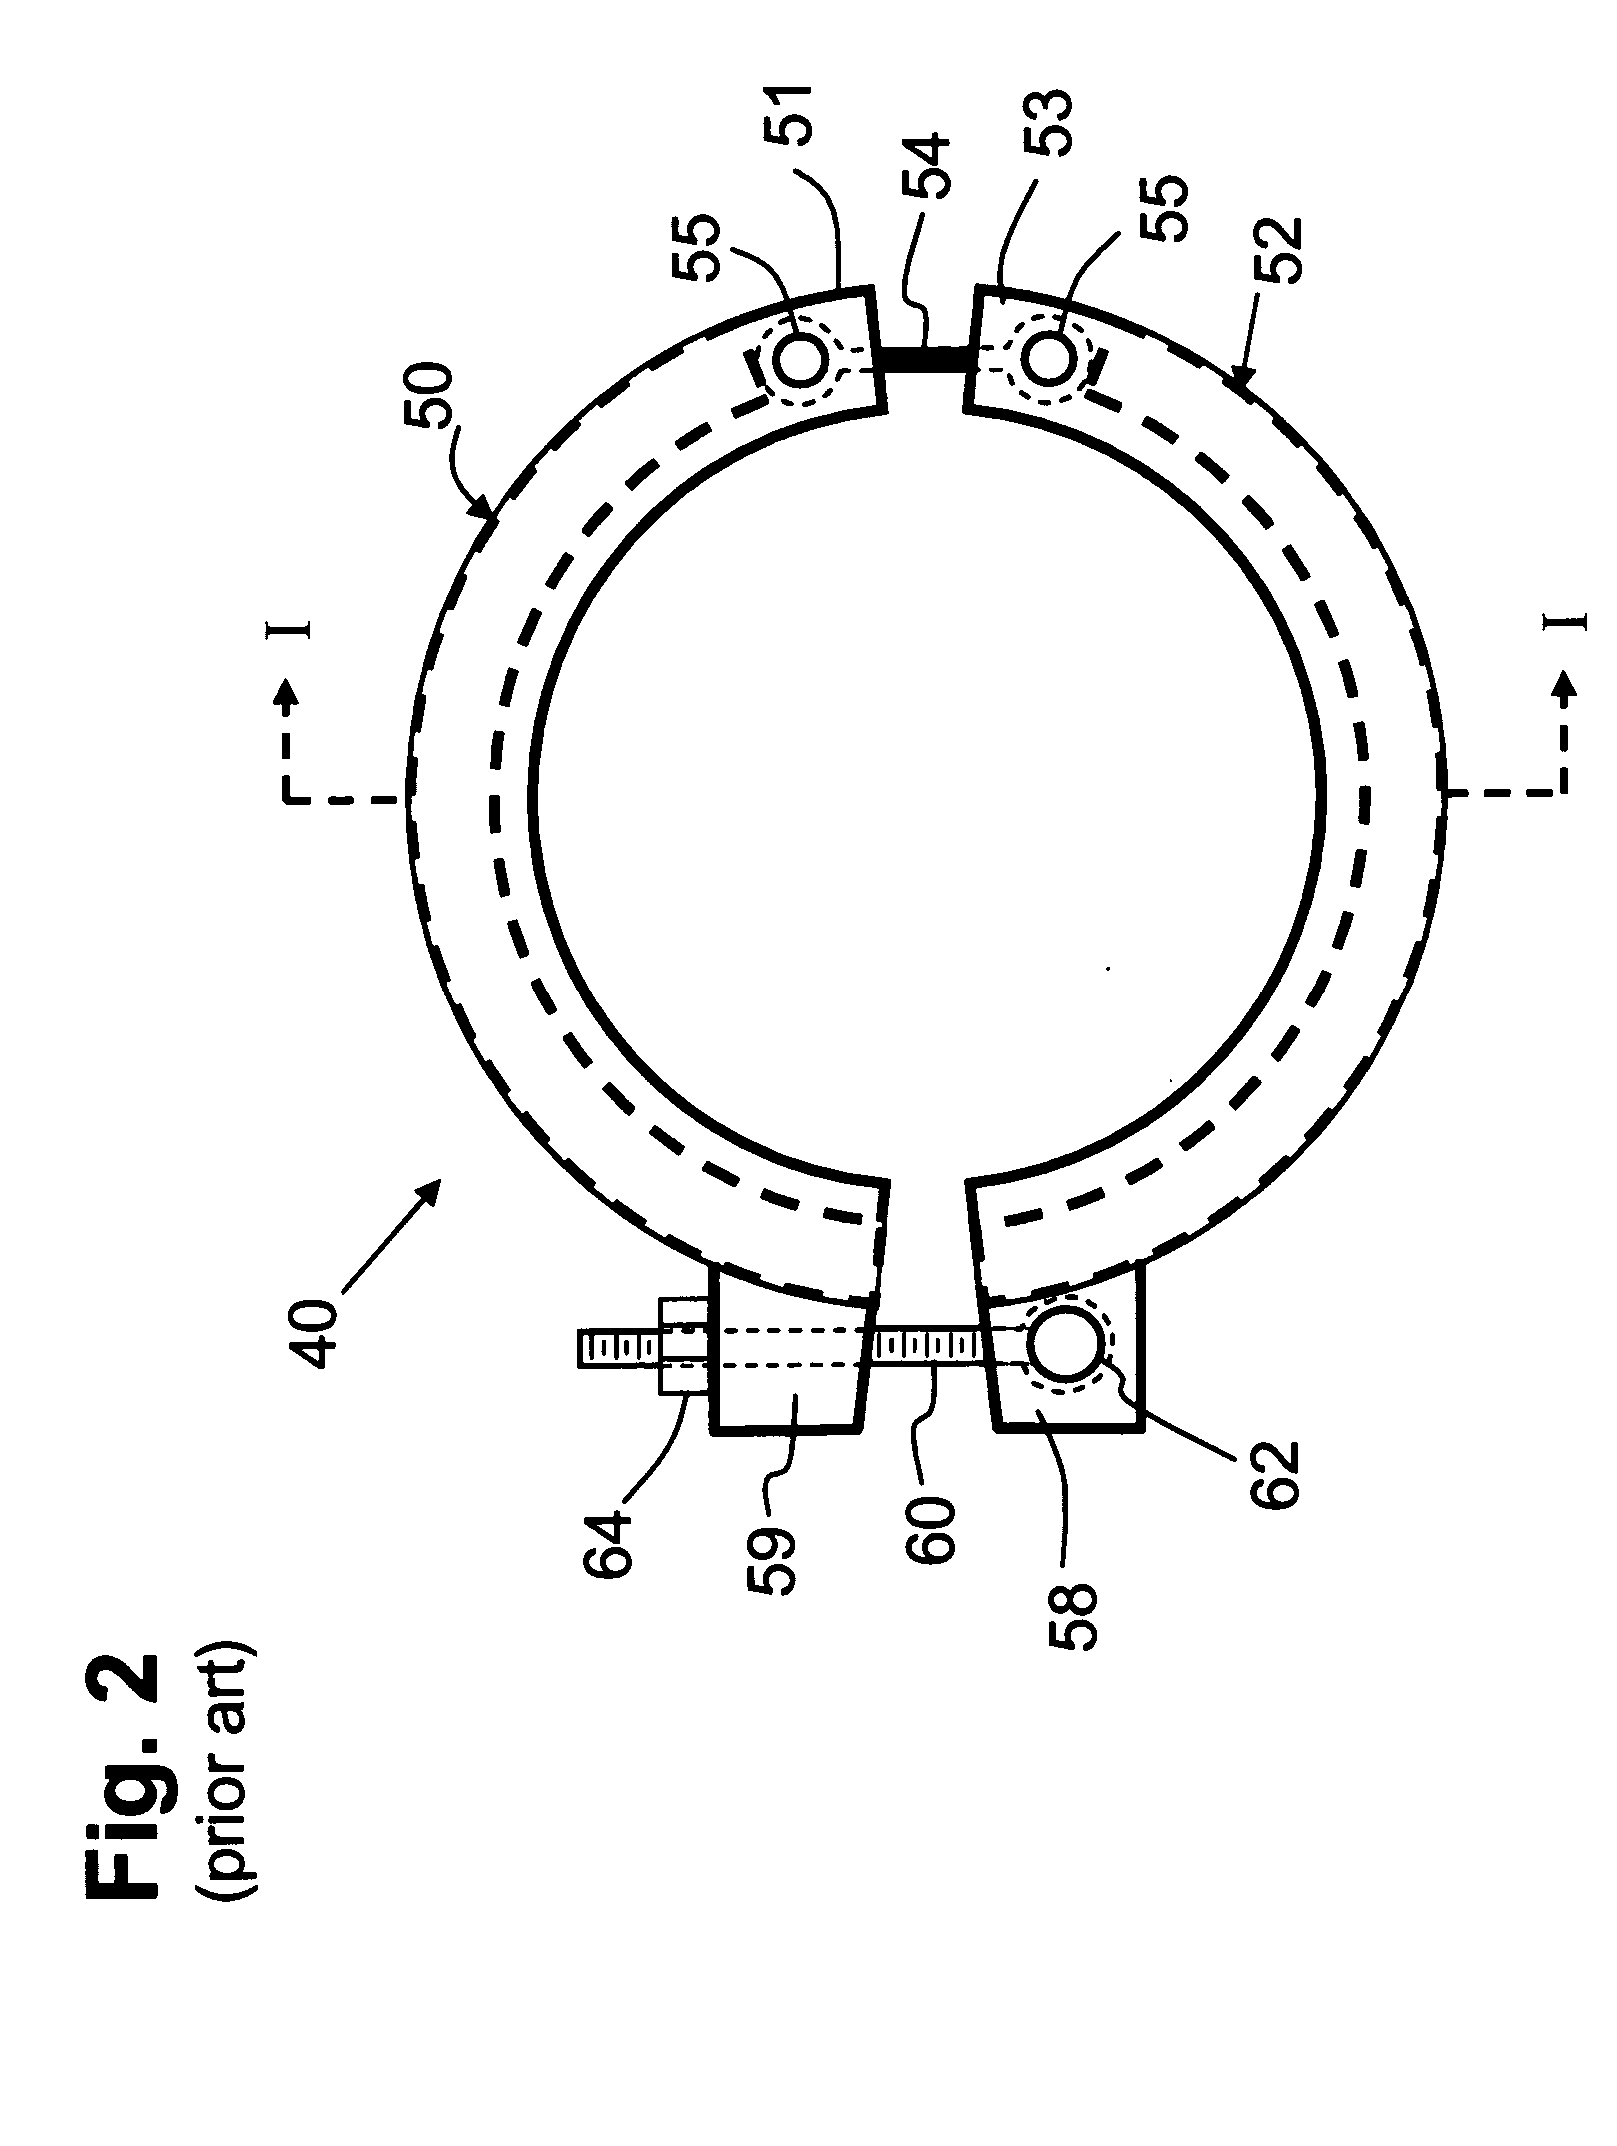 Aseptic flanged joint